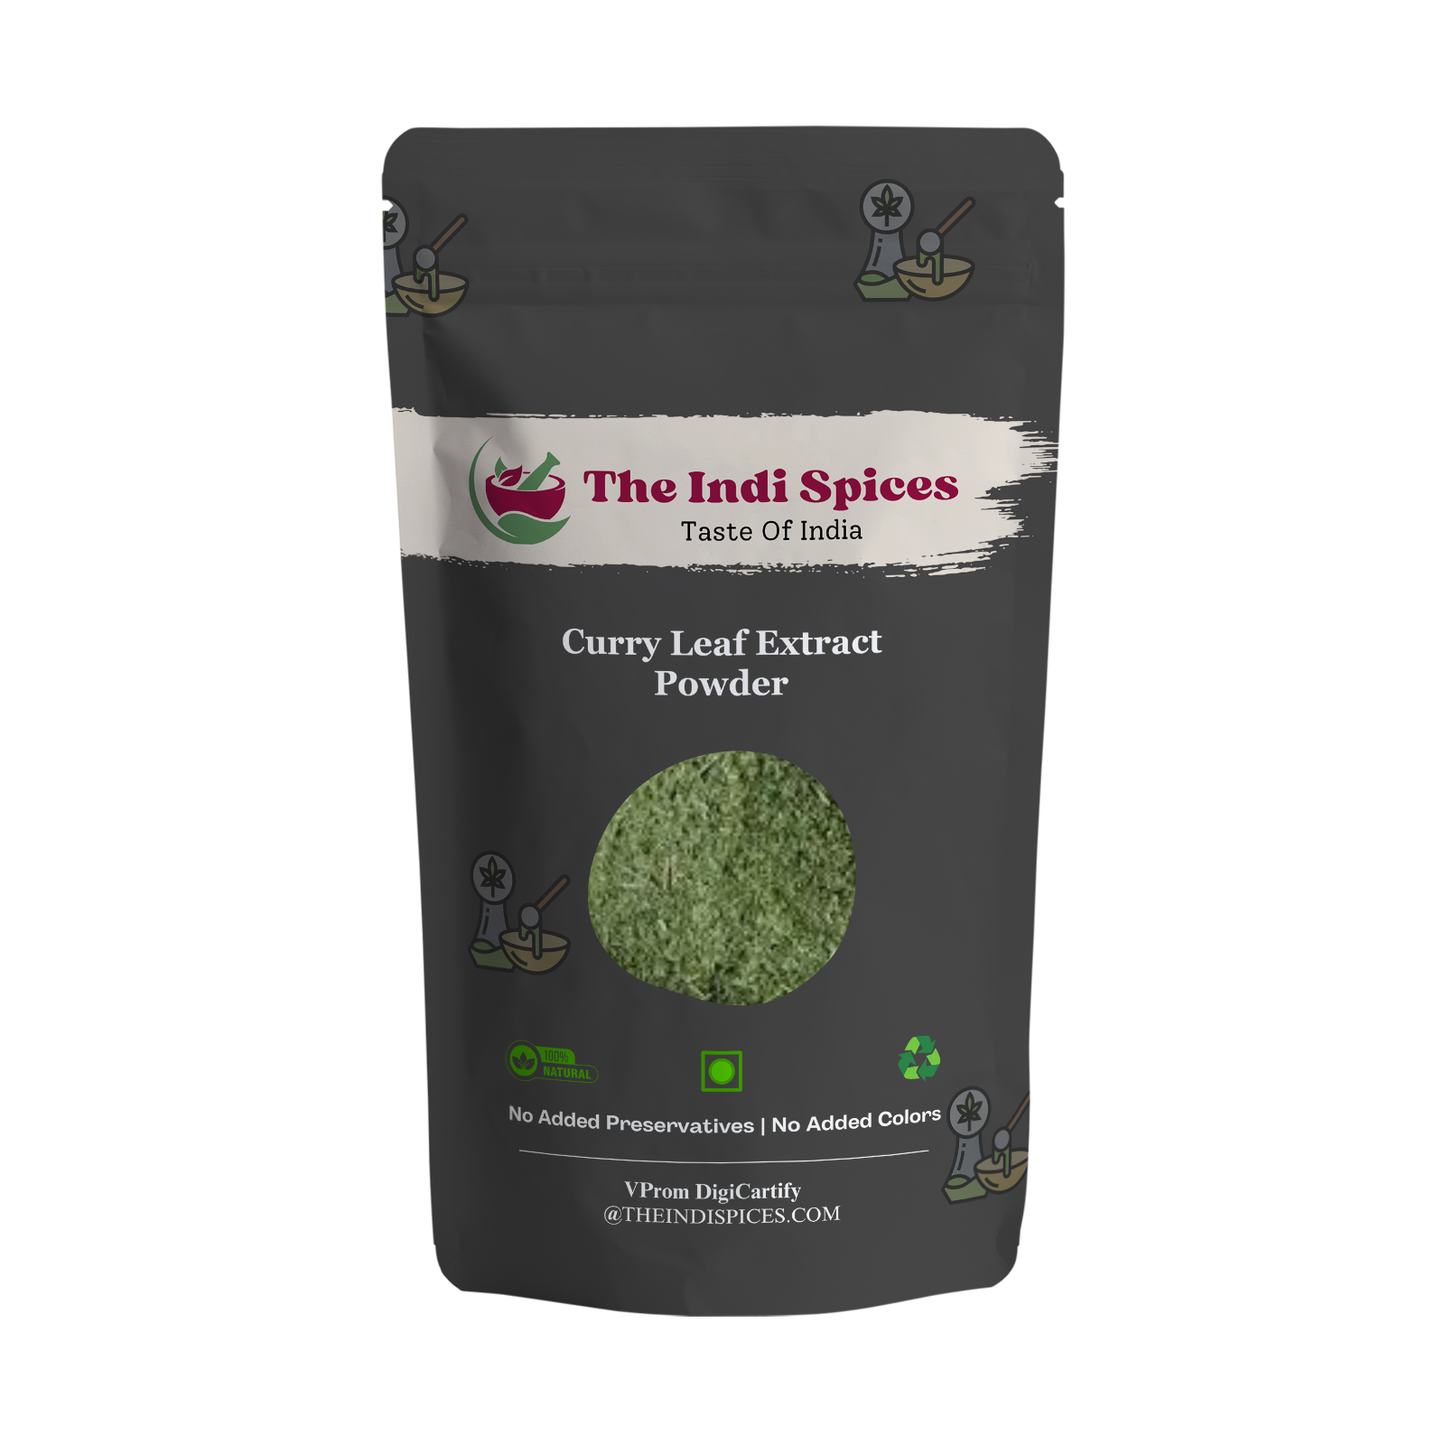 Curry Leaf Extract Powder